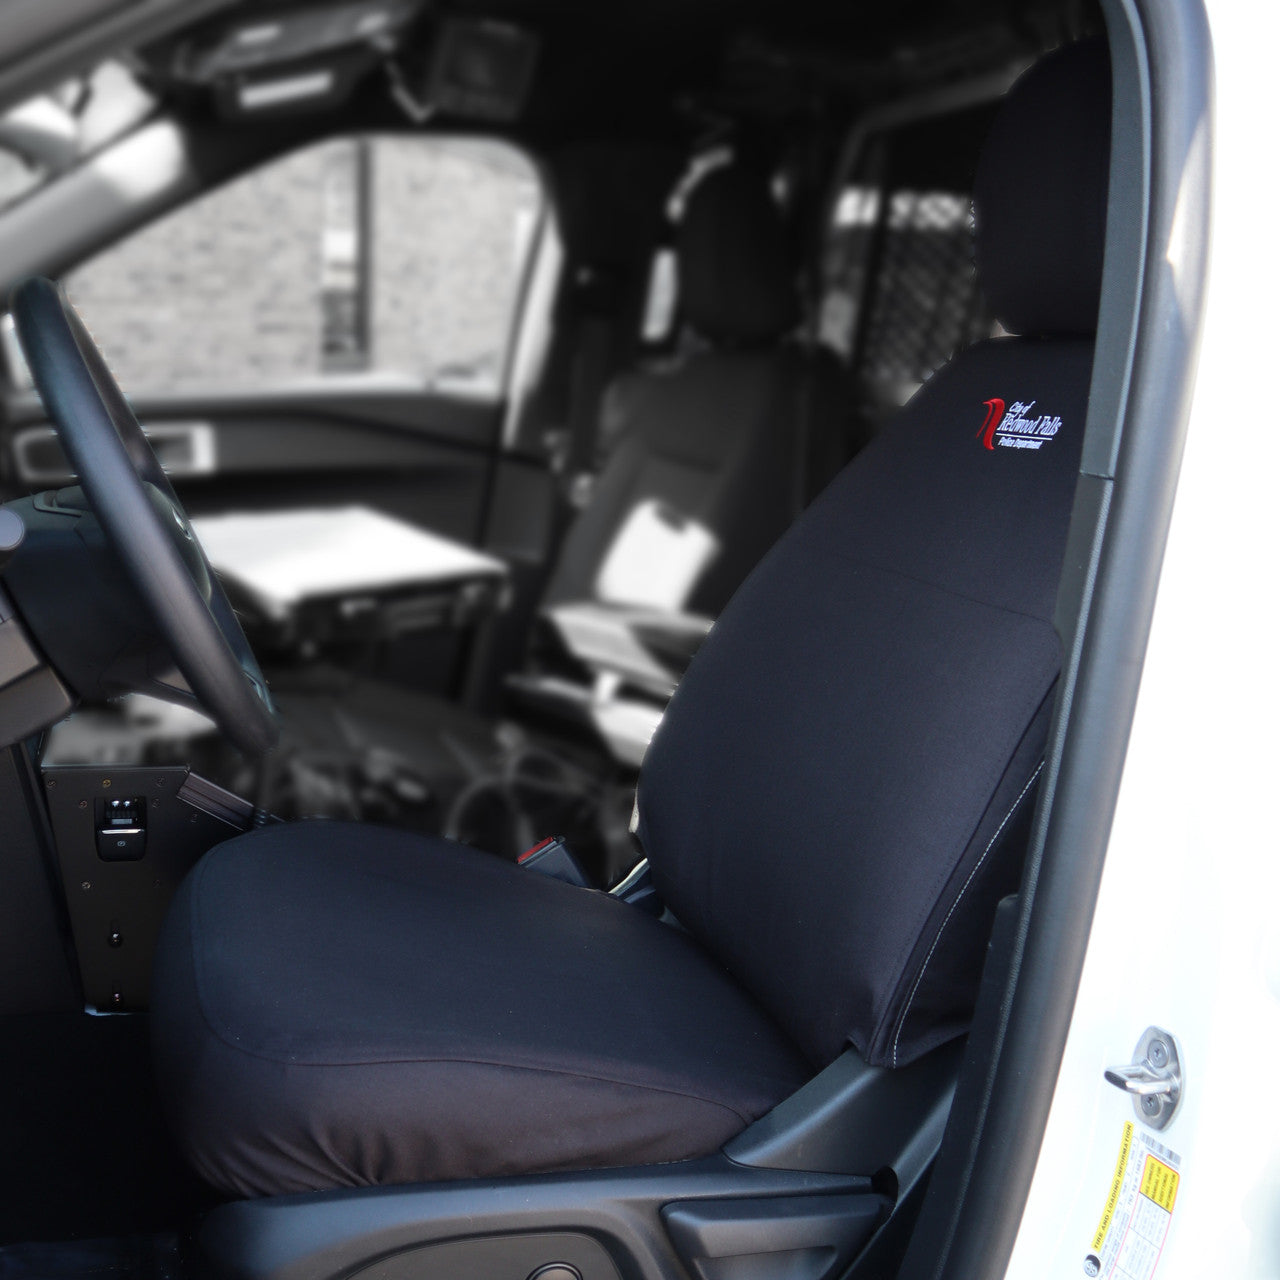 Ford Police Interceptor Utility Seat with Black TigerTough Seat Cover